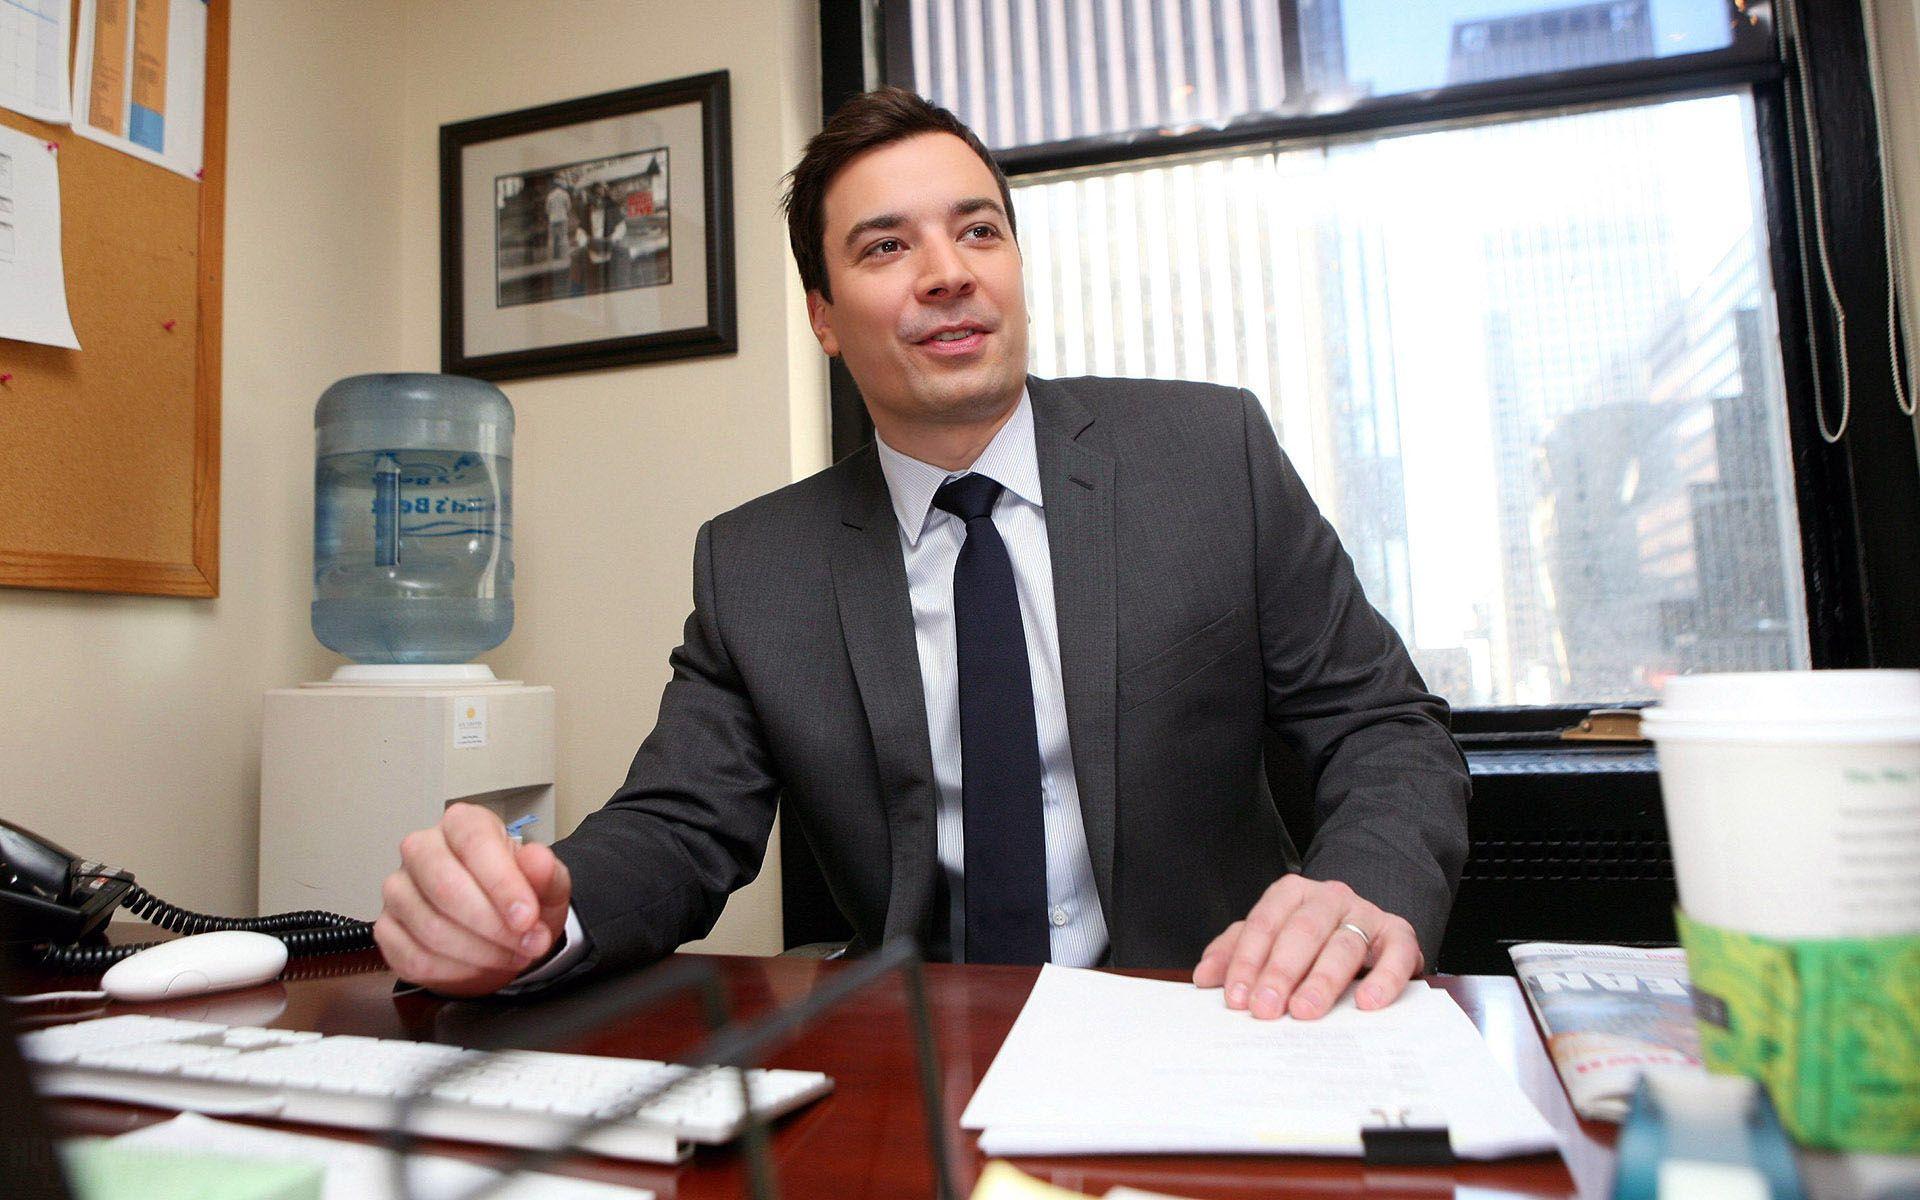 Jimmy Fallon Working At His Office HD 16 10